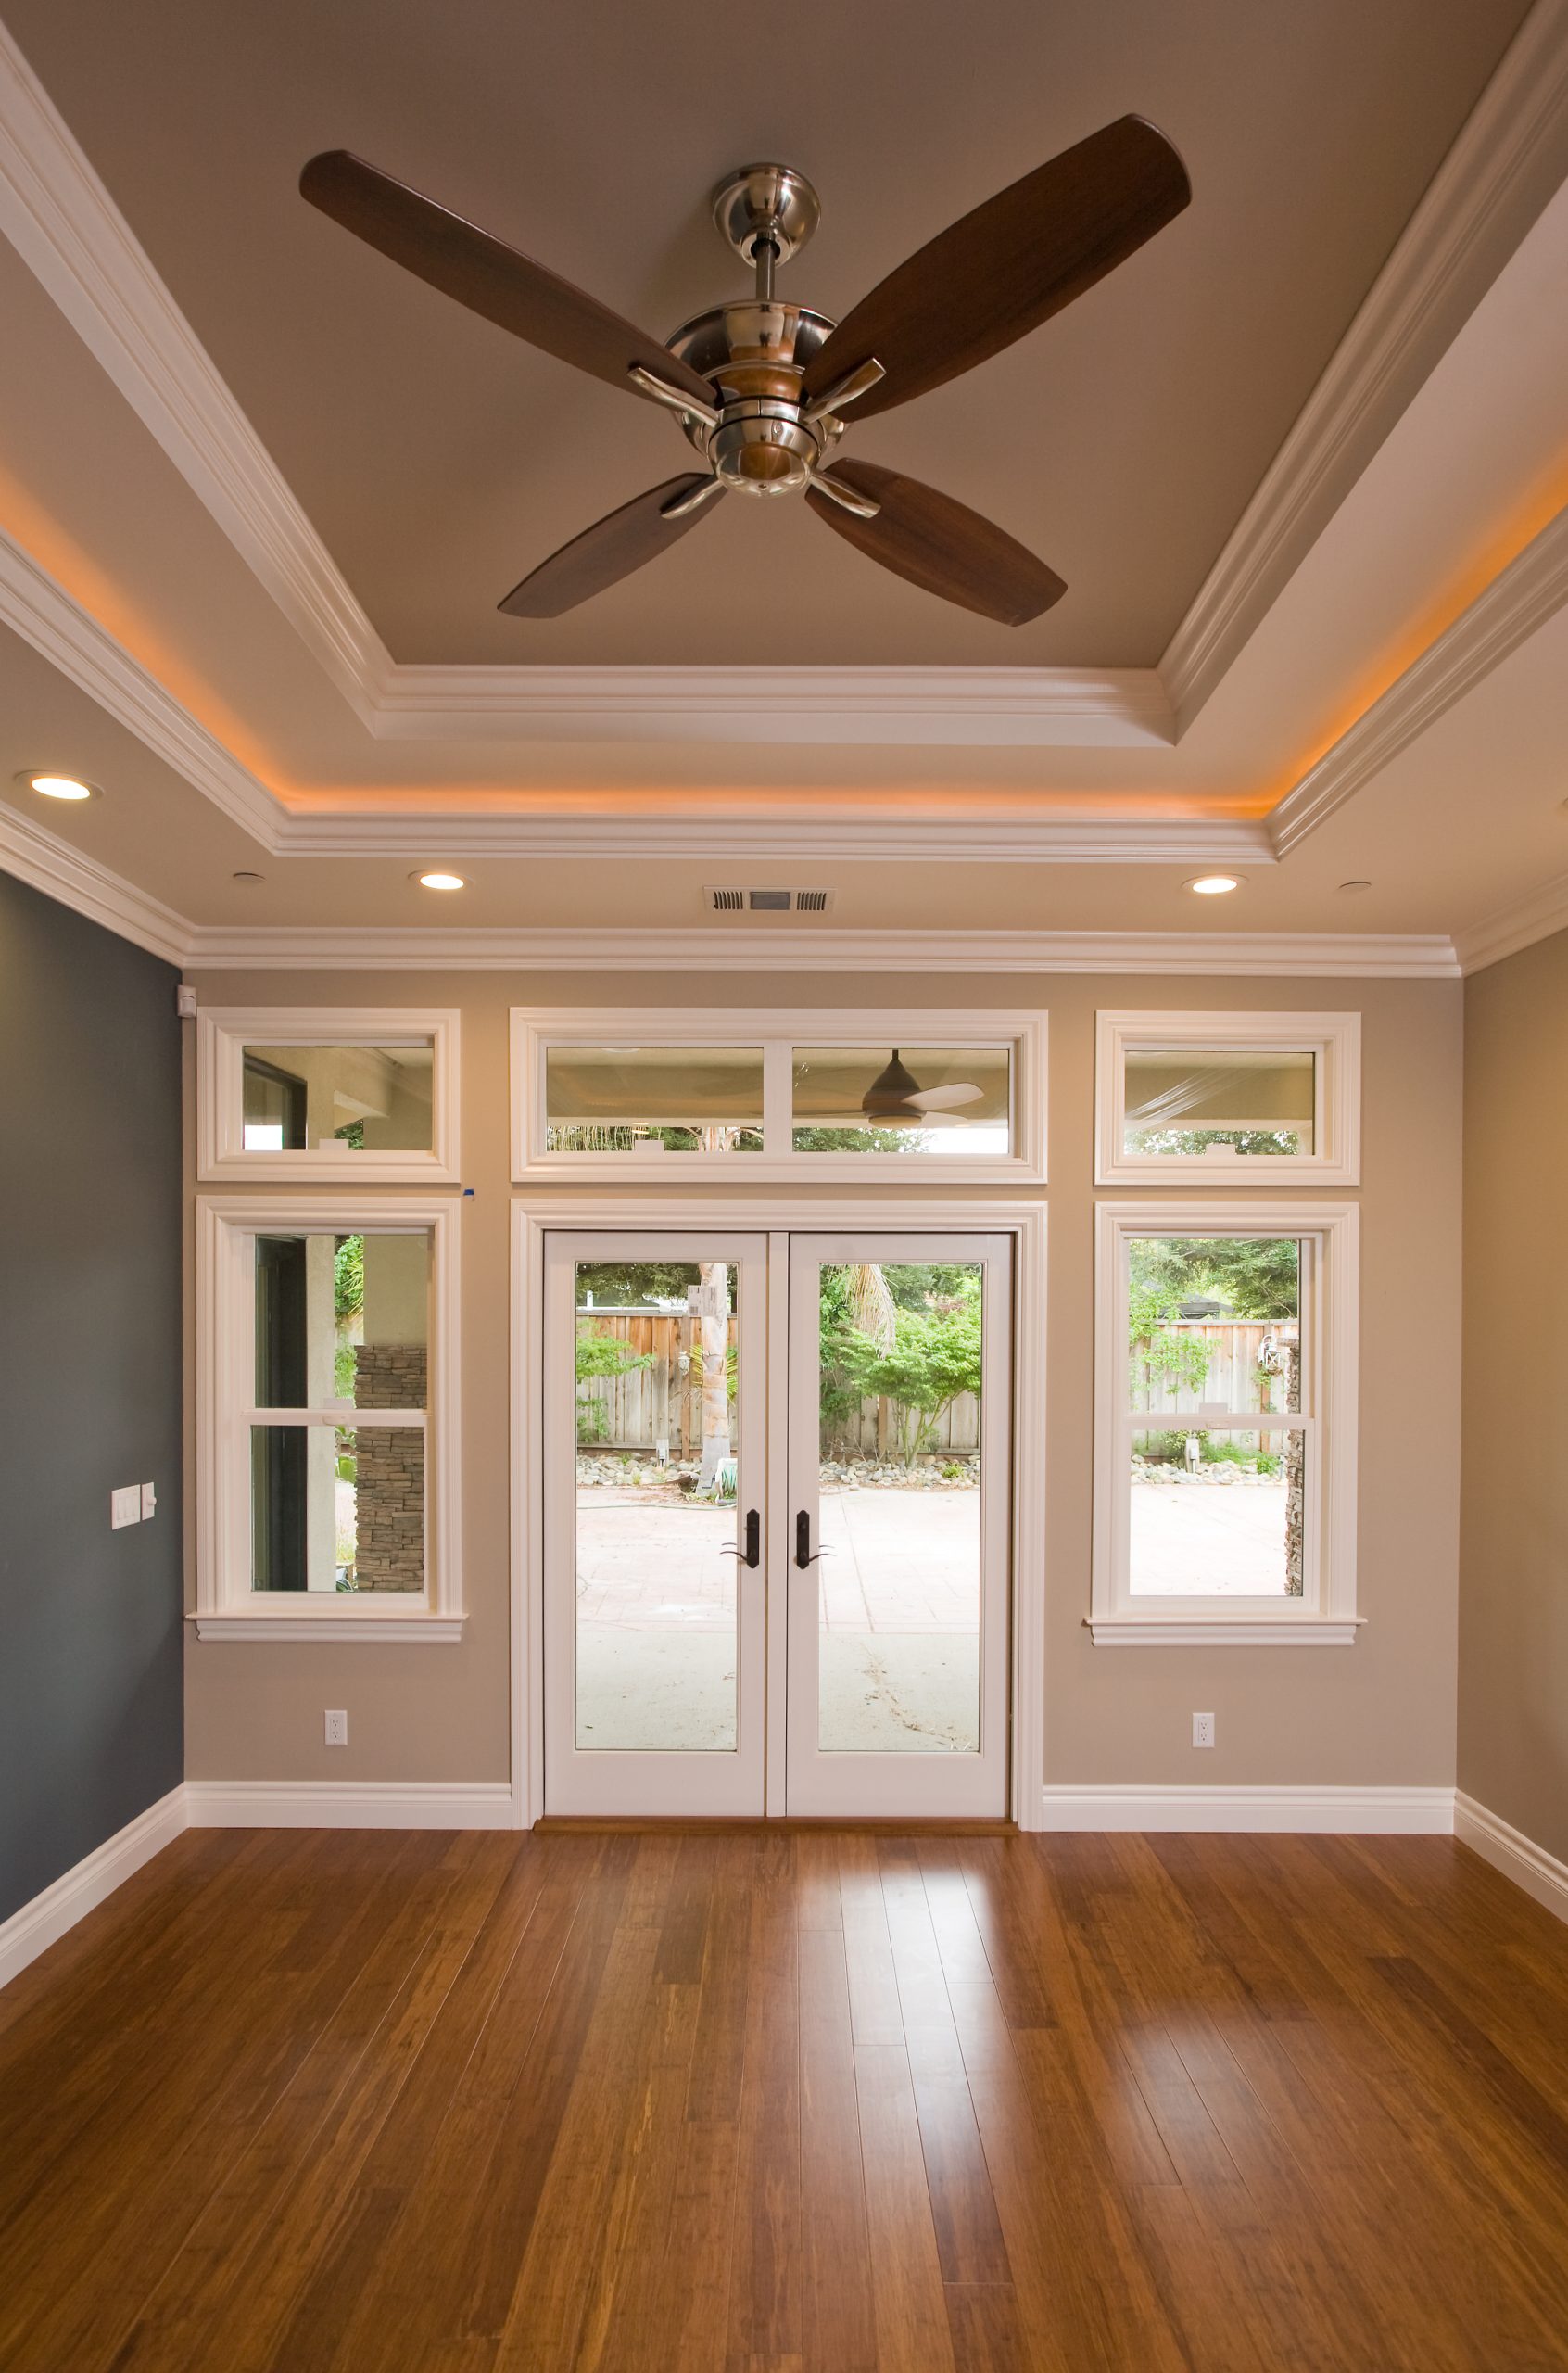 A living room with hardwood floors and recessed ceilings.